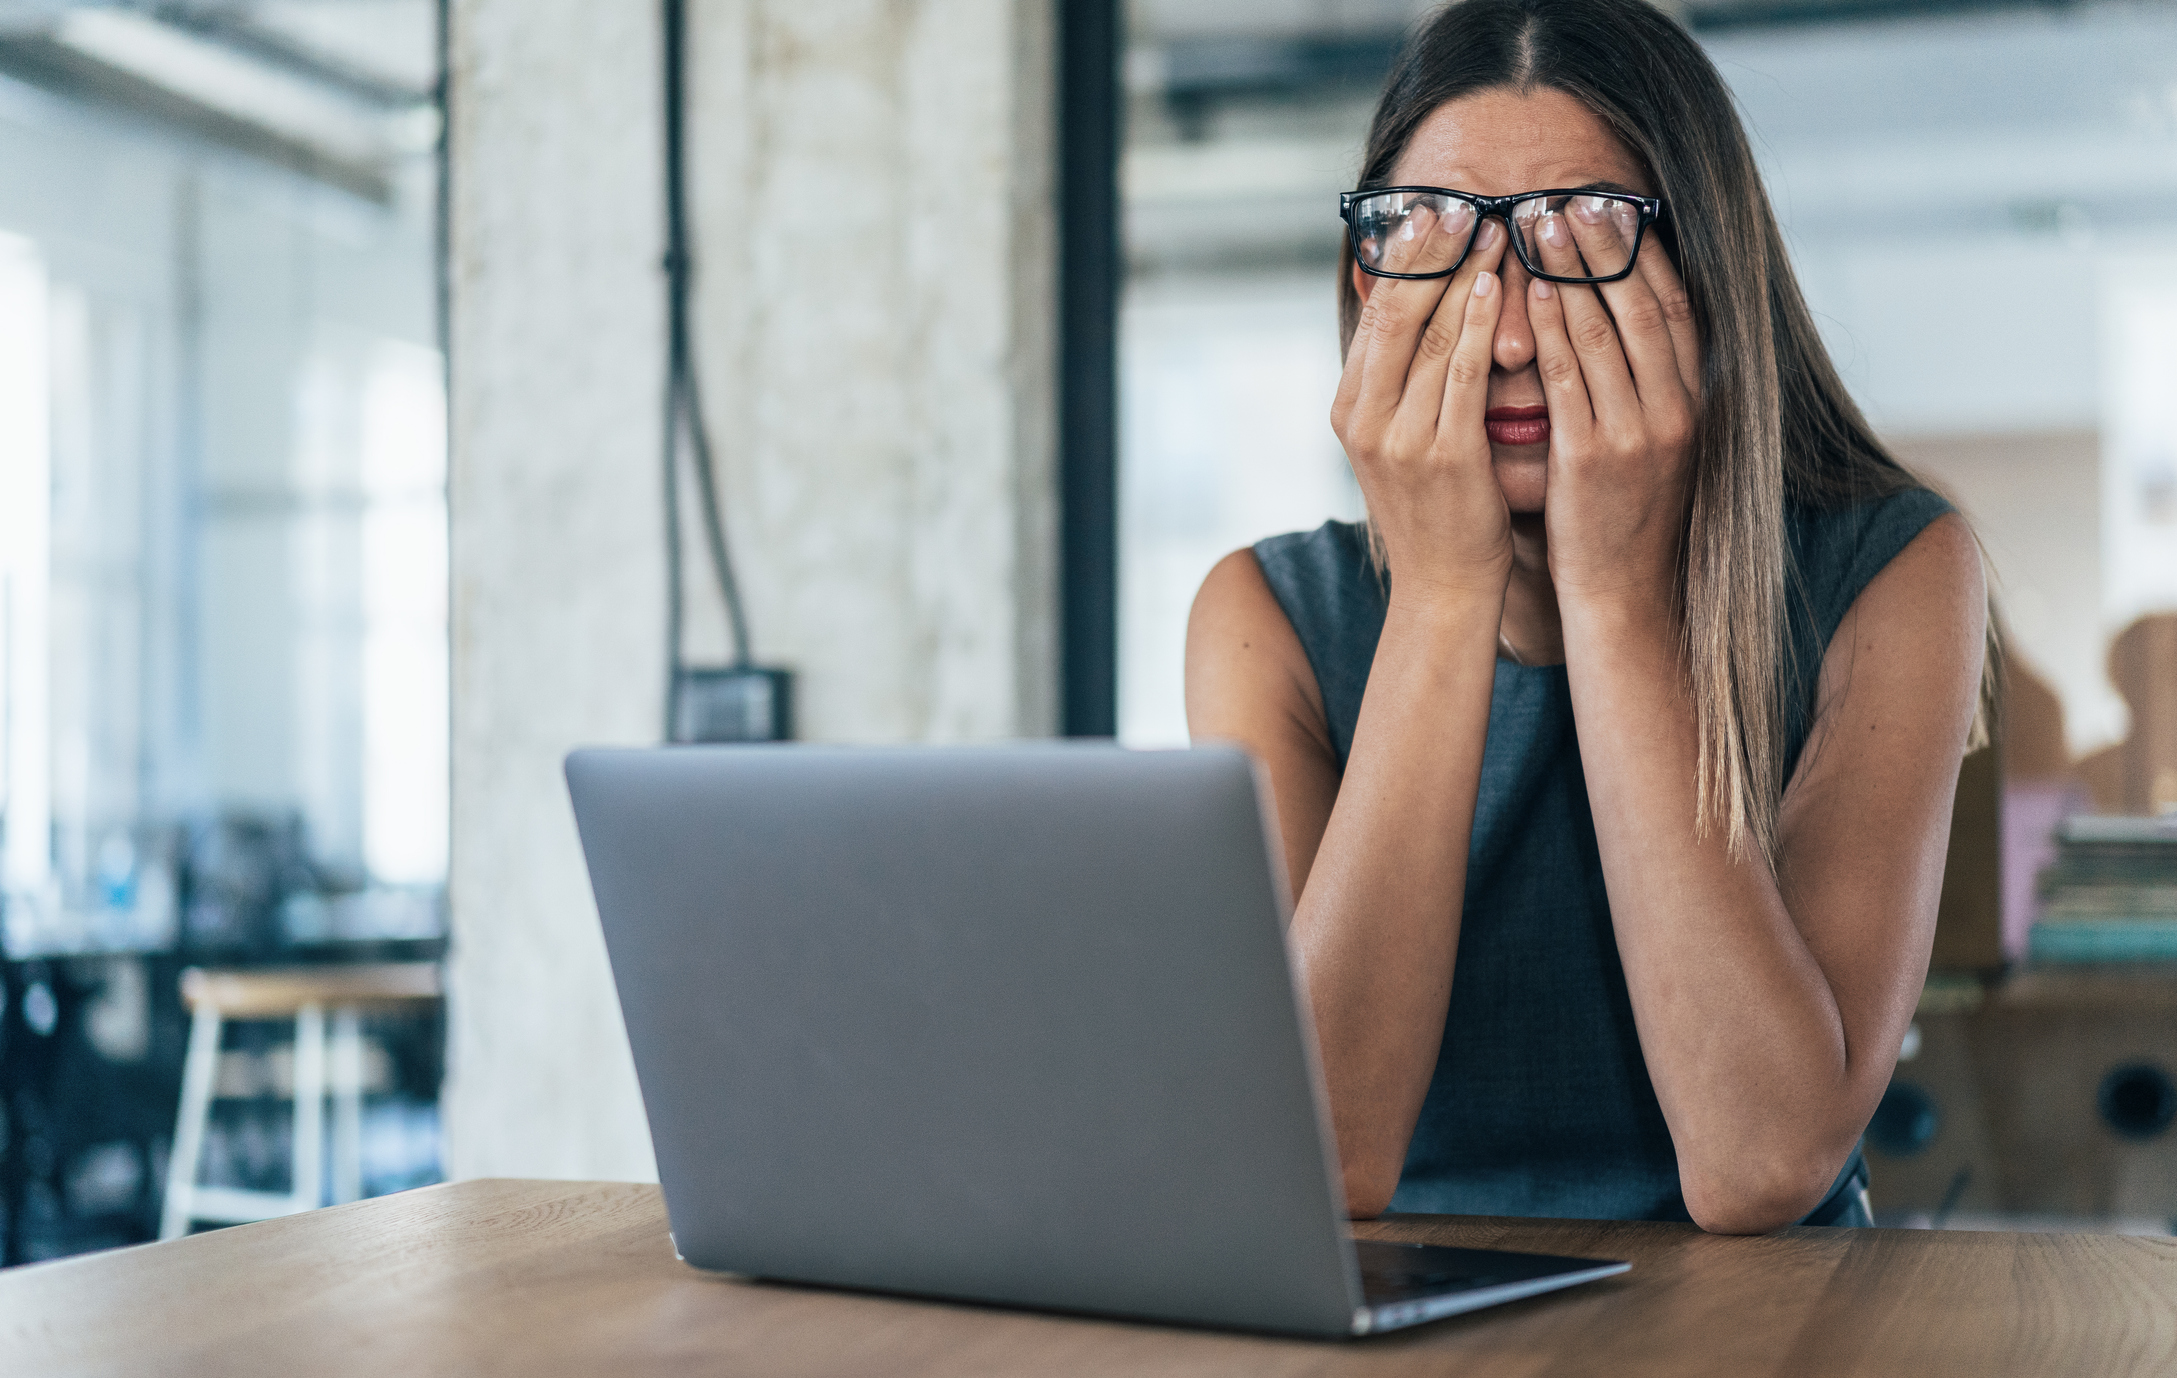 Weary person rubbing their eyes behind laptop